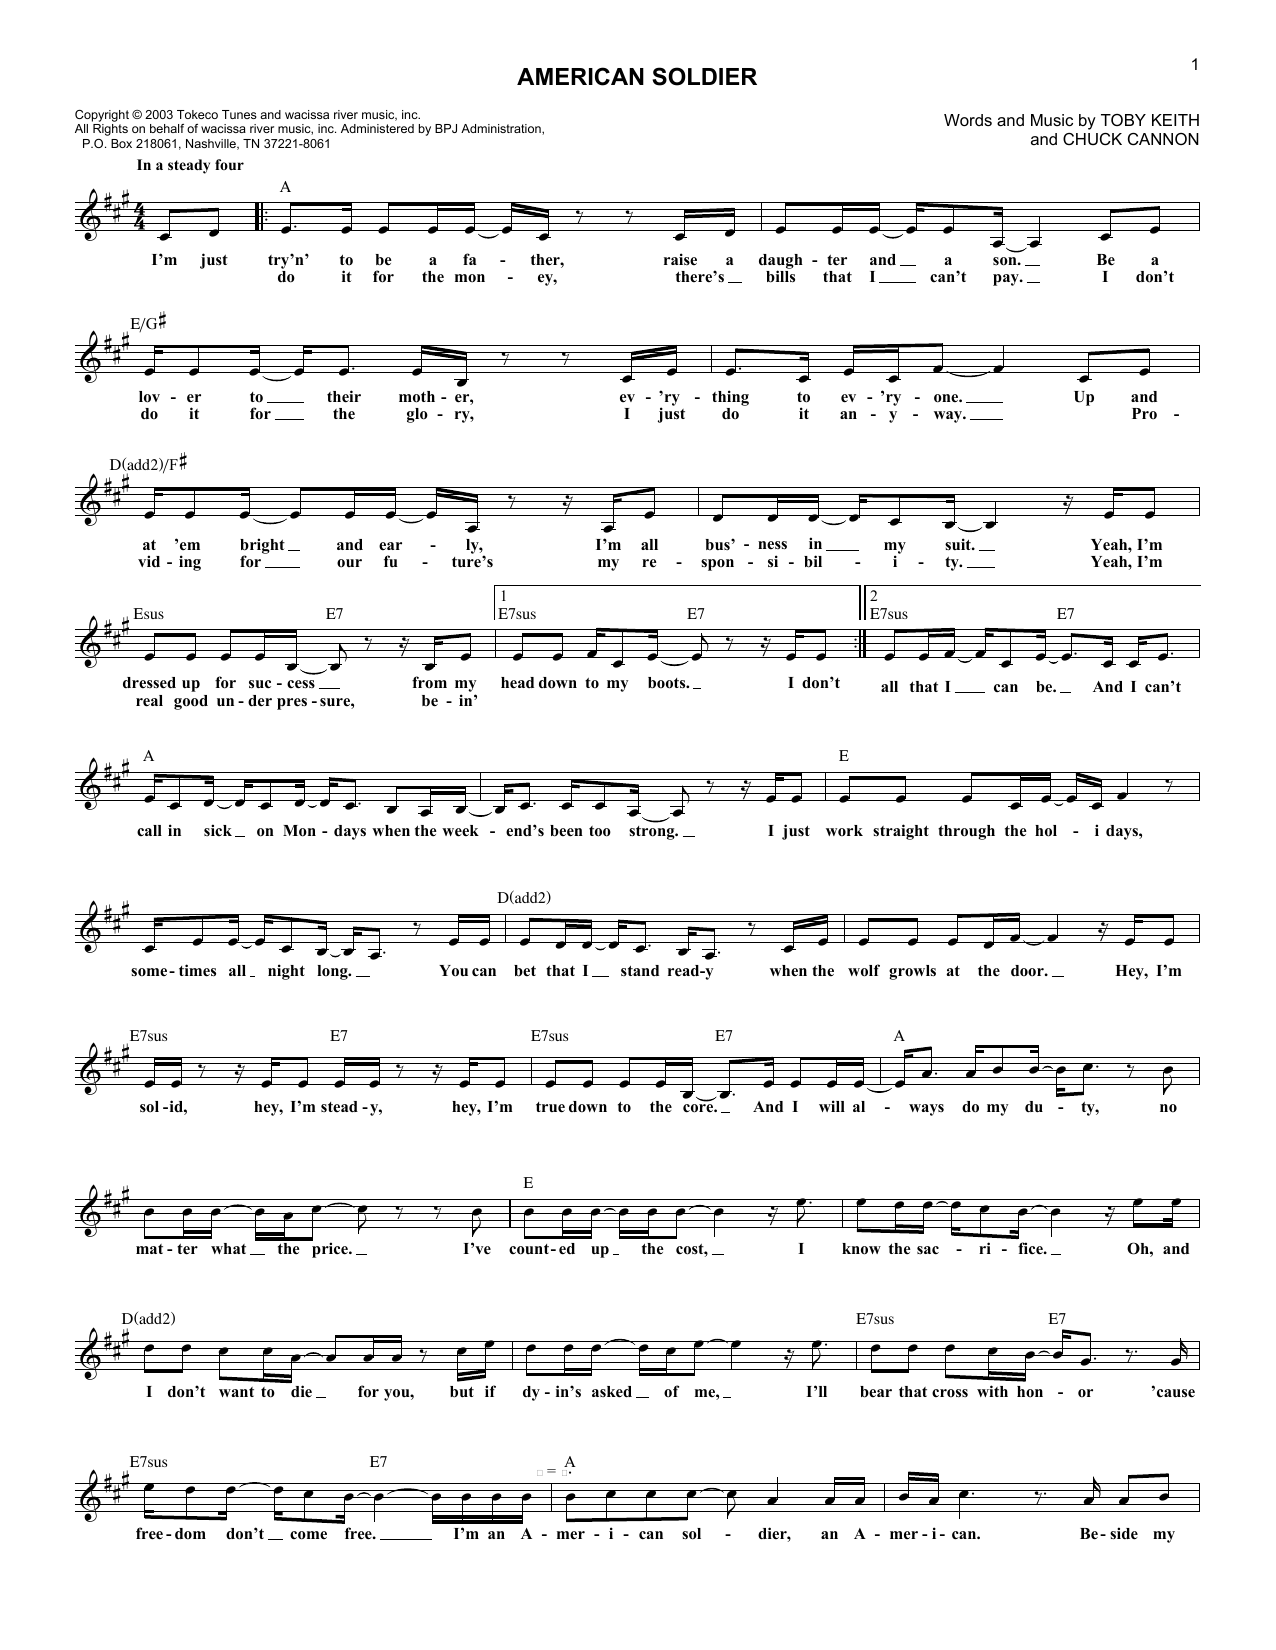 Download Toby Keith American Soldier Sheet Music